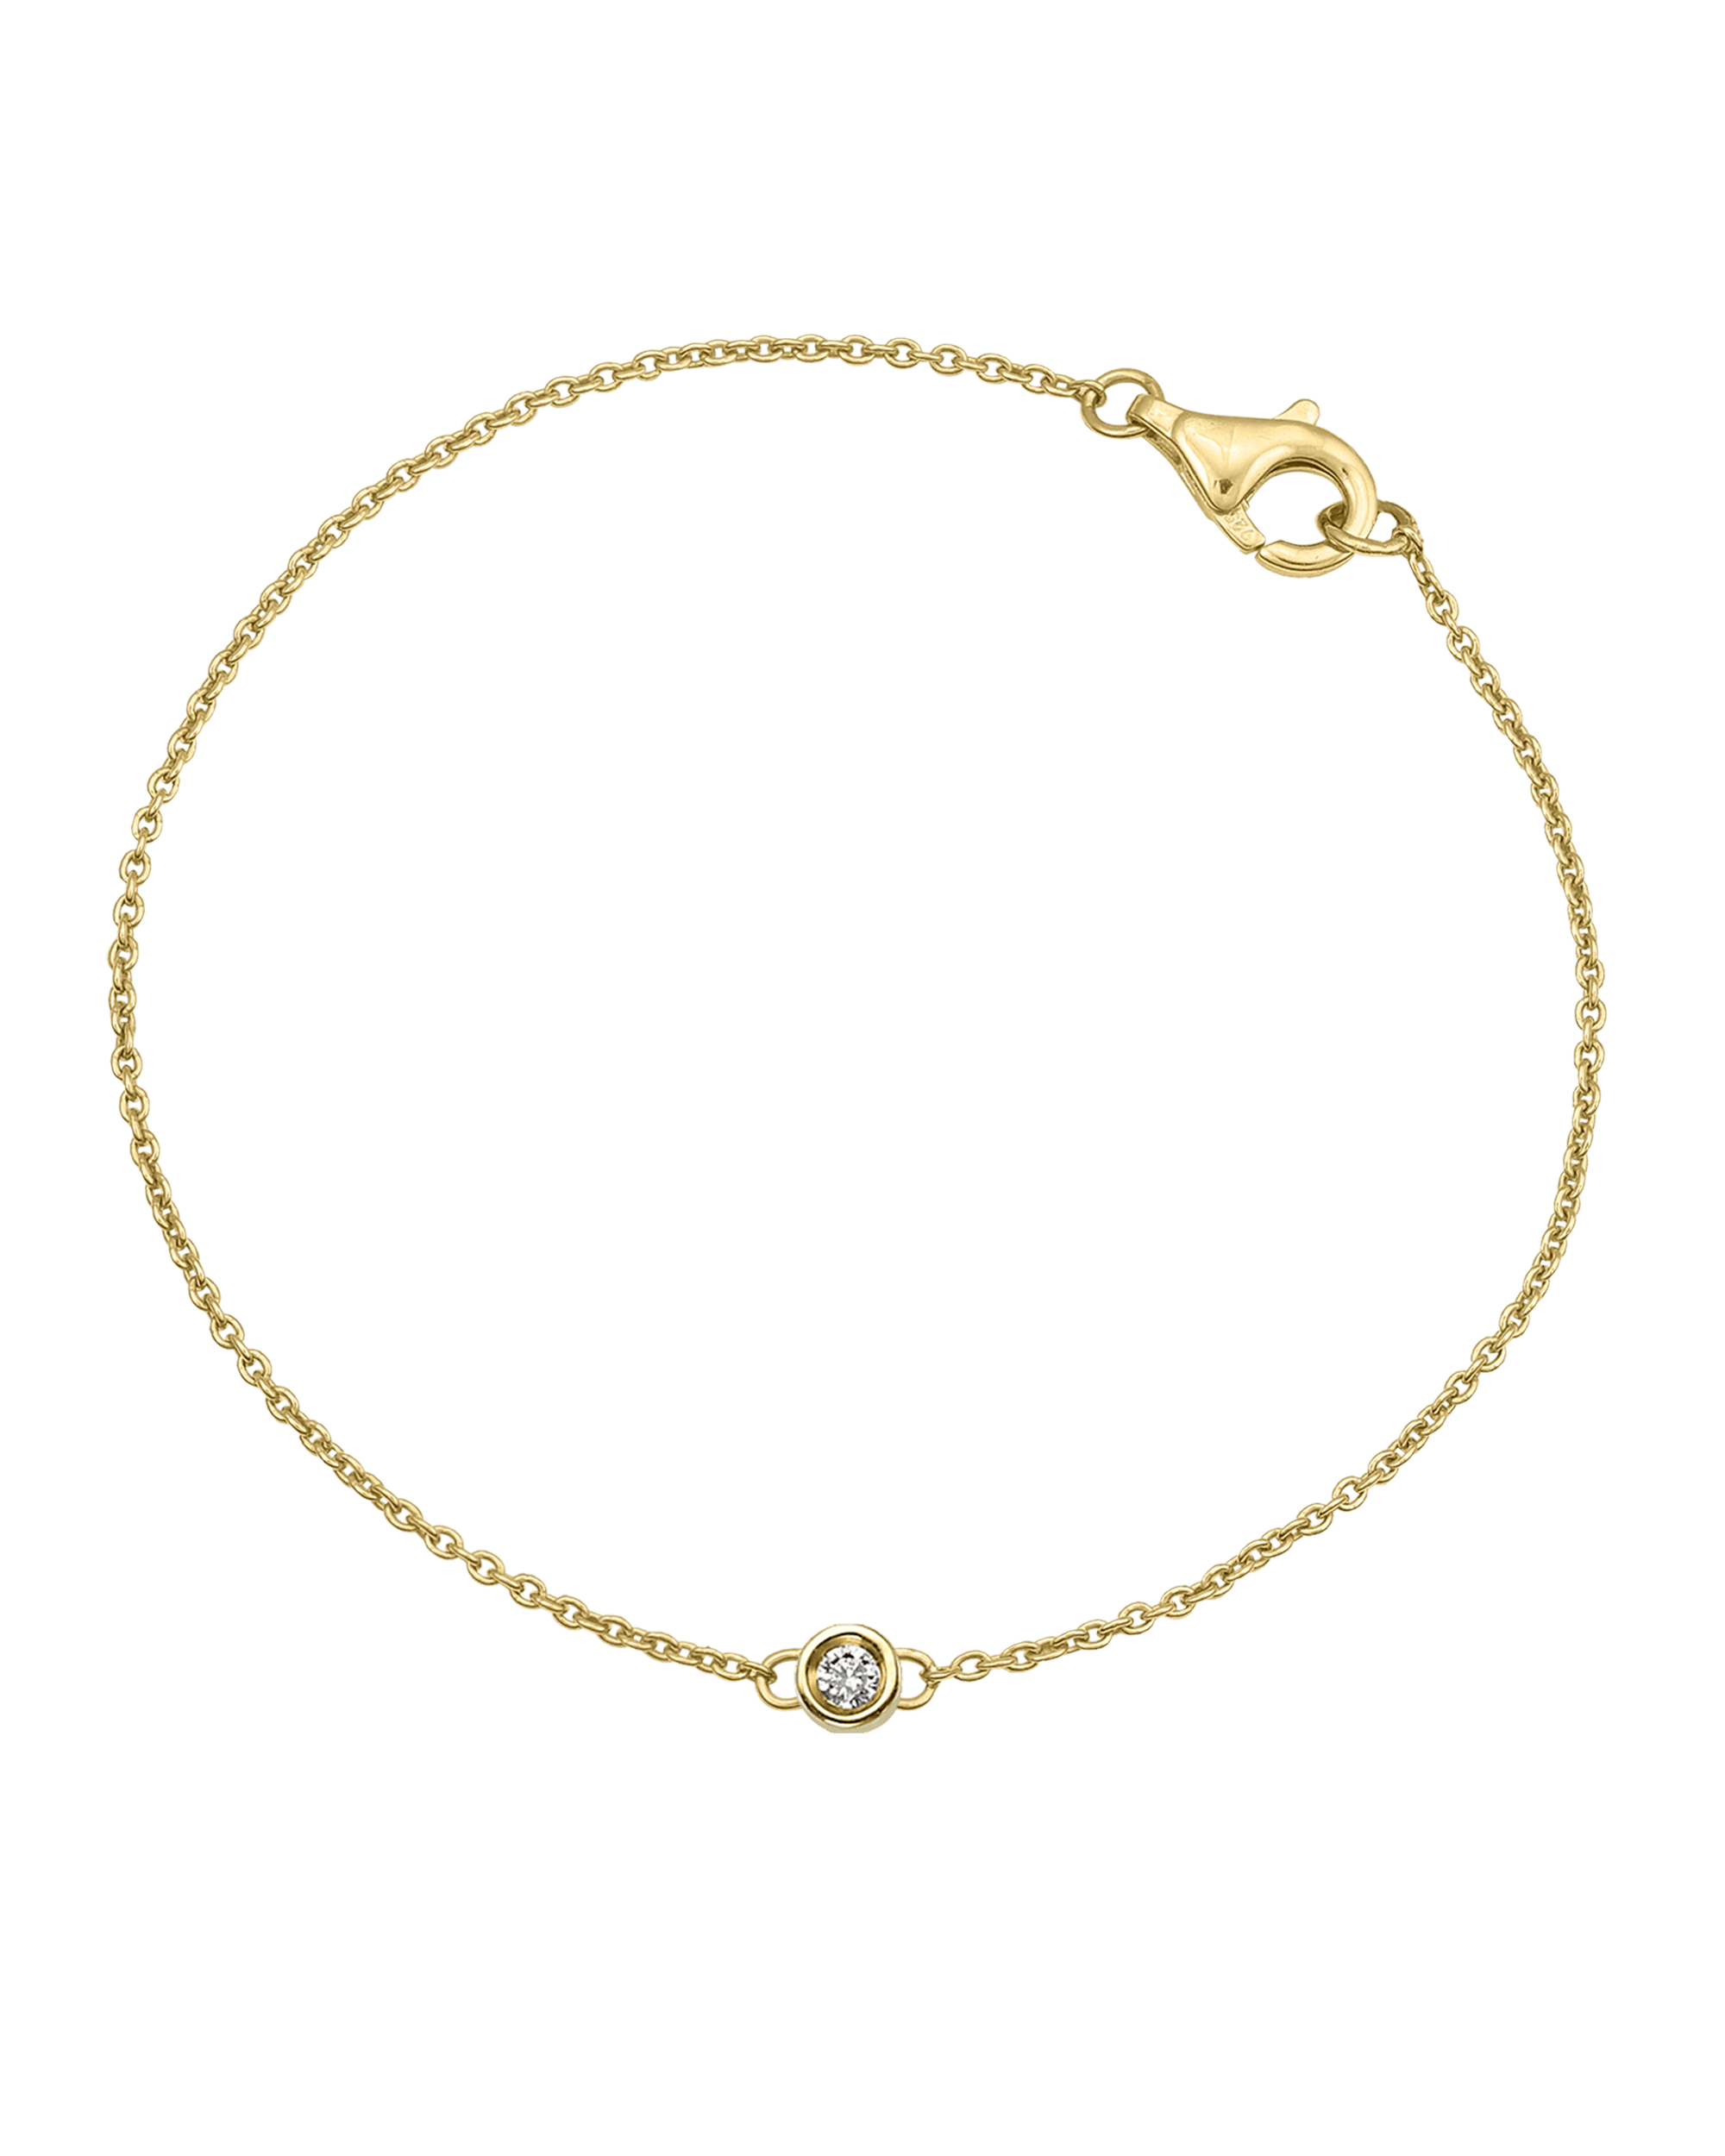 Chain of Love - 14K Yellow Gold Bracelets magal-dev Small: 0.03ct 6" 